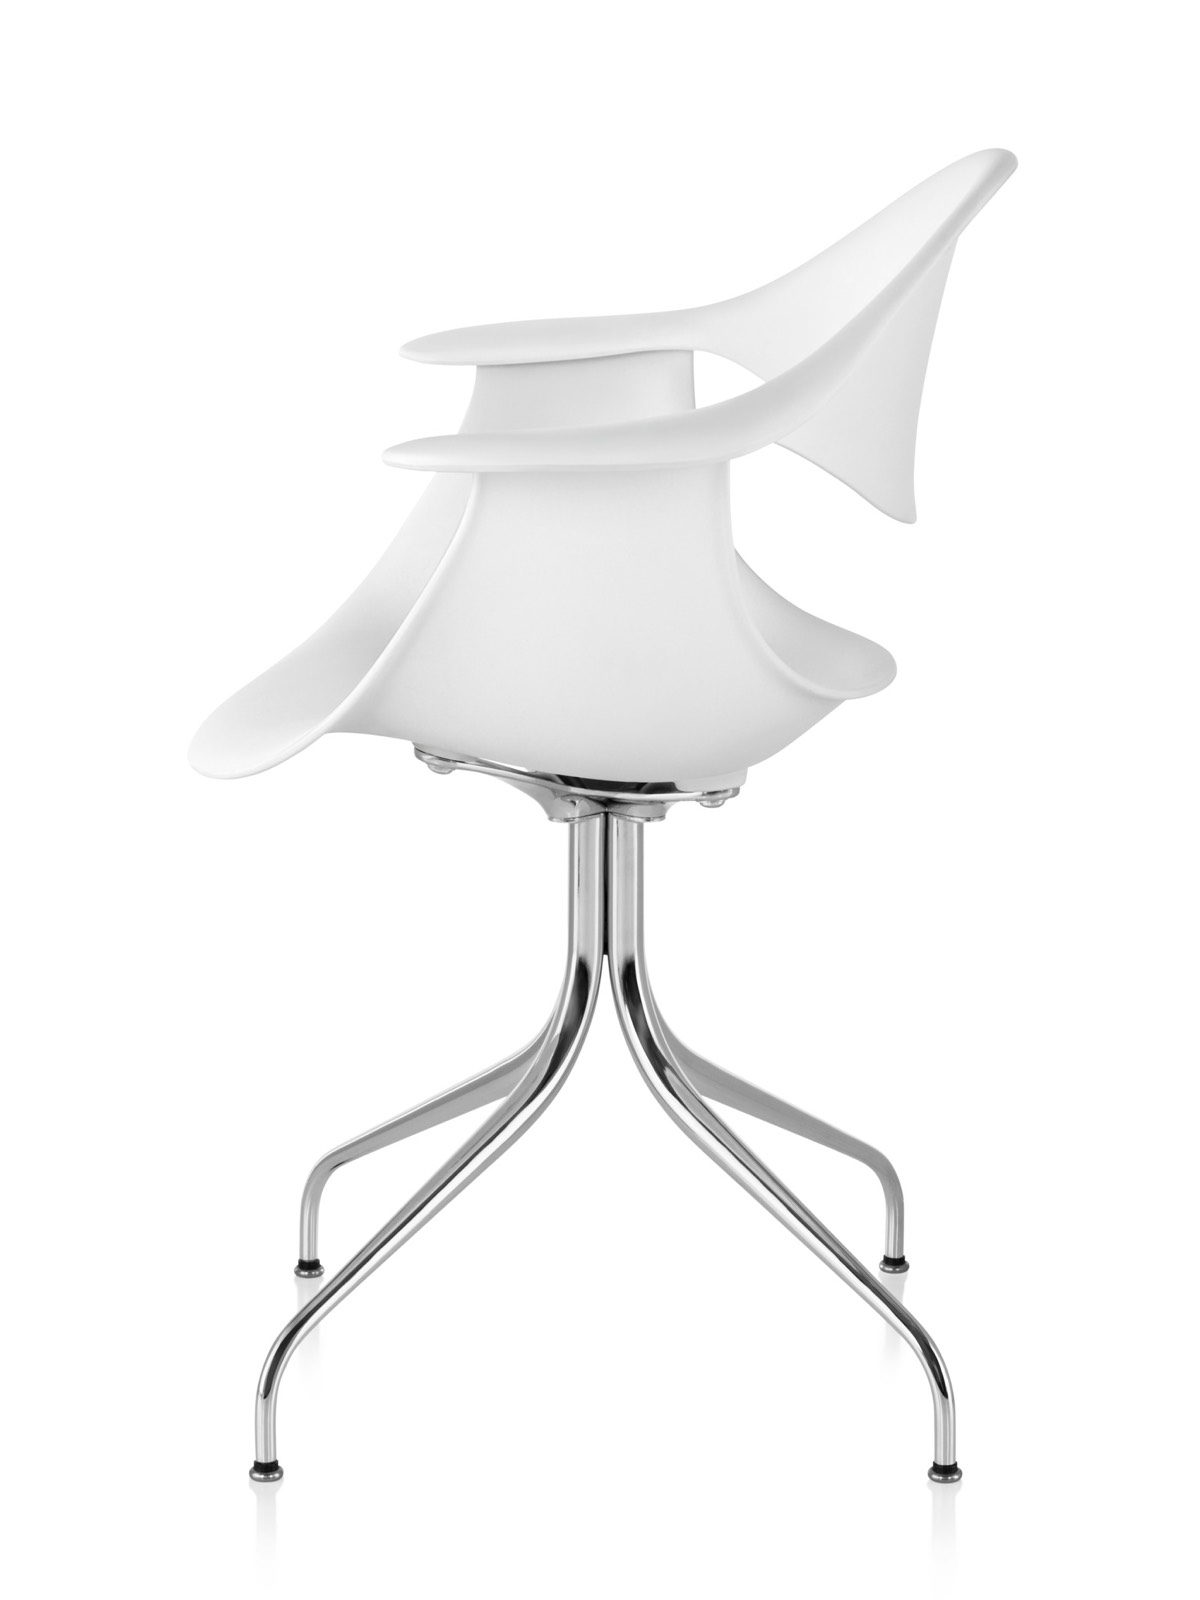 Profile view of a white Nelson Swag Leg Armchair, showing the molded plastic shell and curved steel legs.